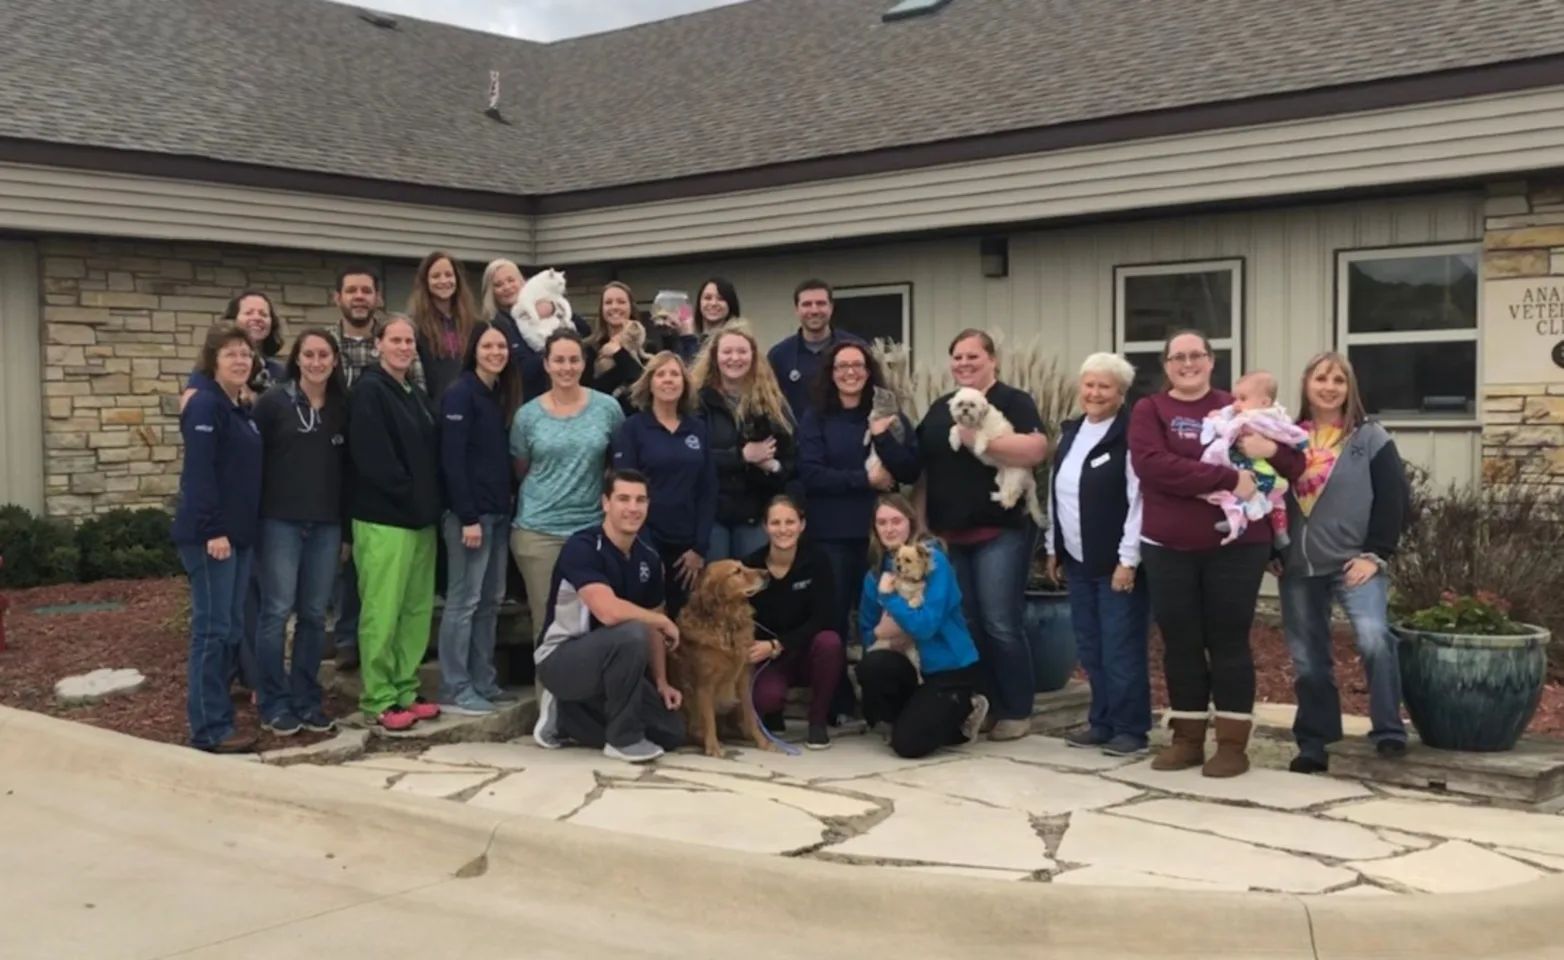 Group staff photo in front of Anamosa Veterinary Clinic